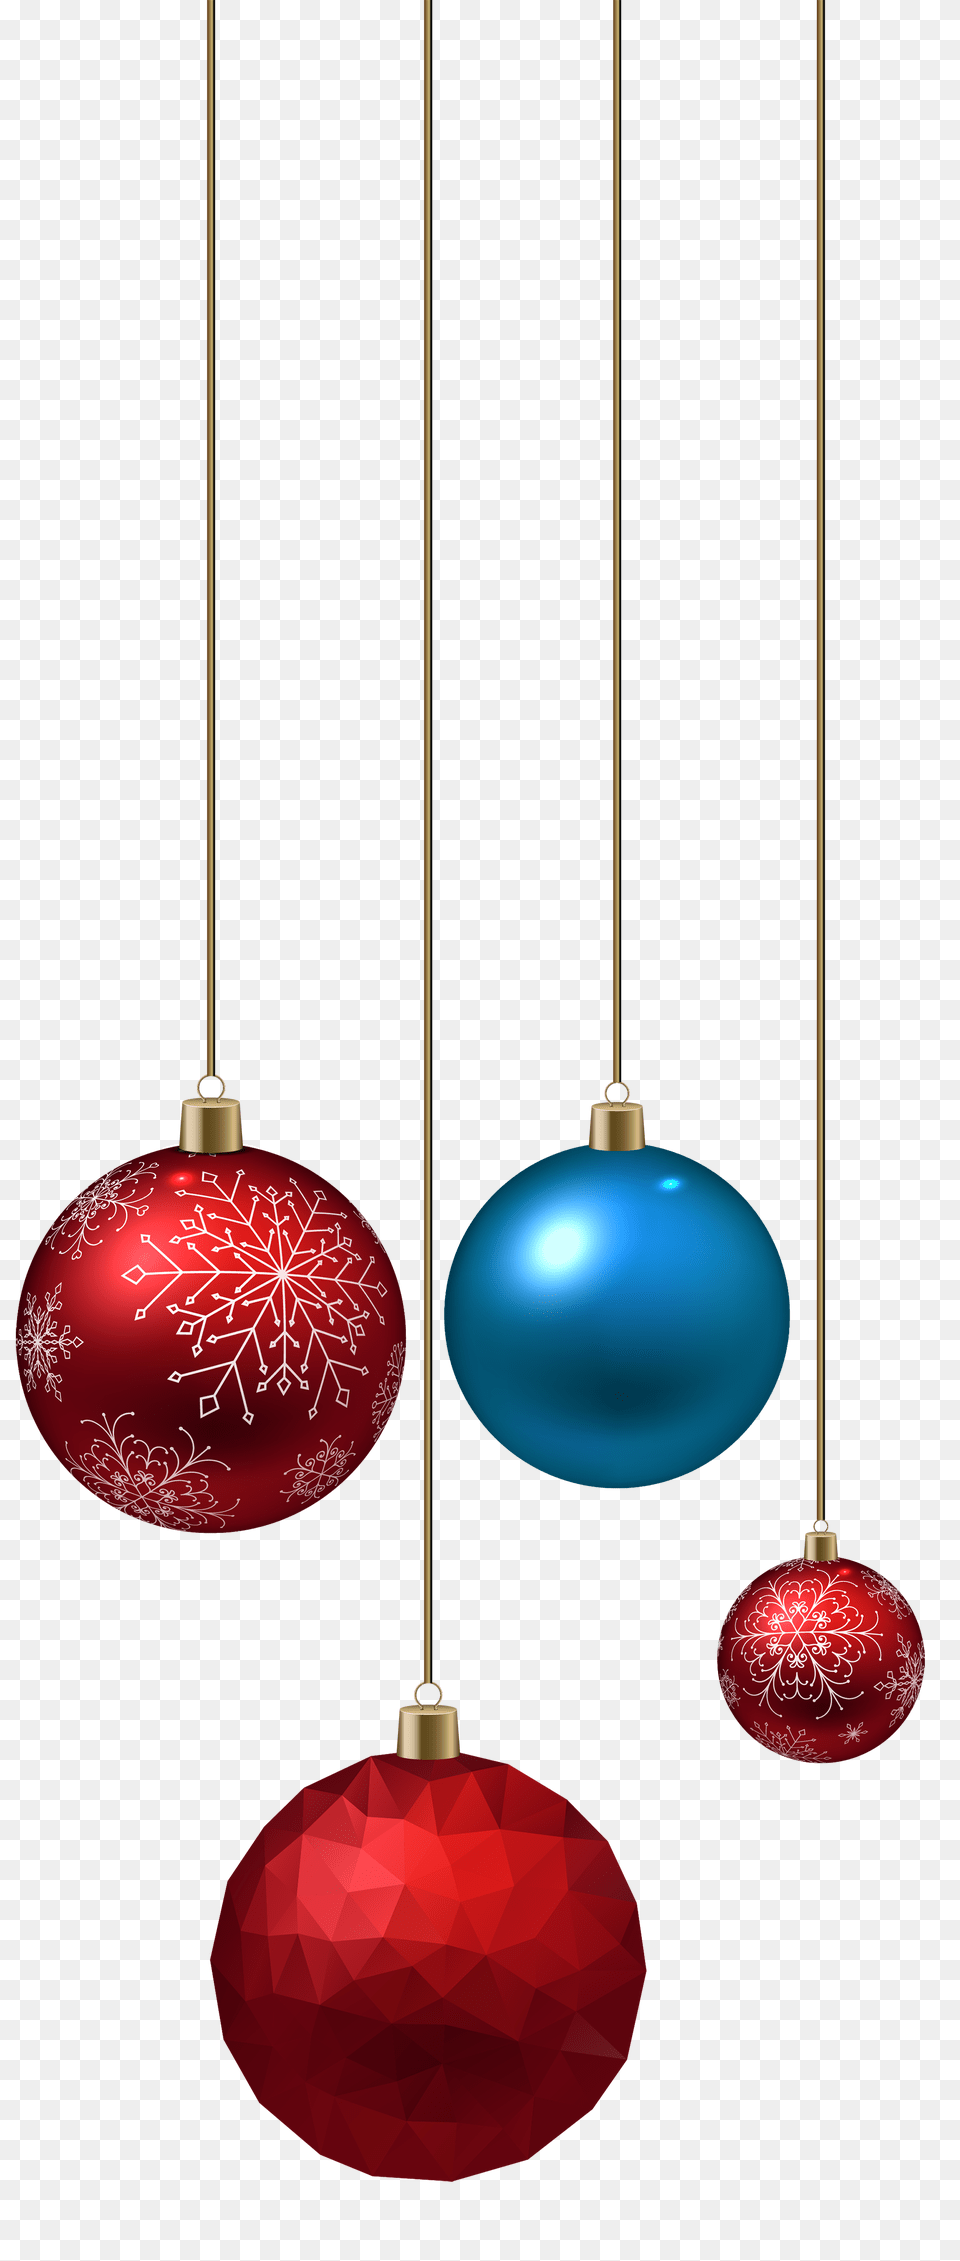 Blue And Red Christmas Ball Images Christmas Balls Transparent Background, Sphere, Accessories, Lighting Free Png Download